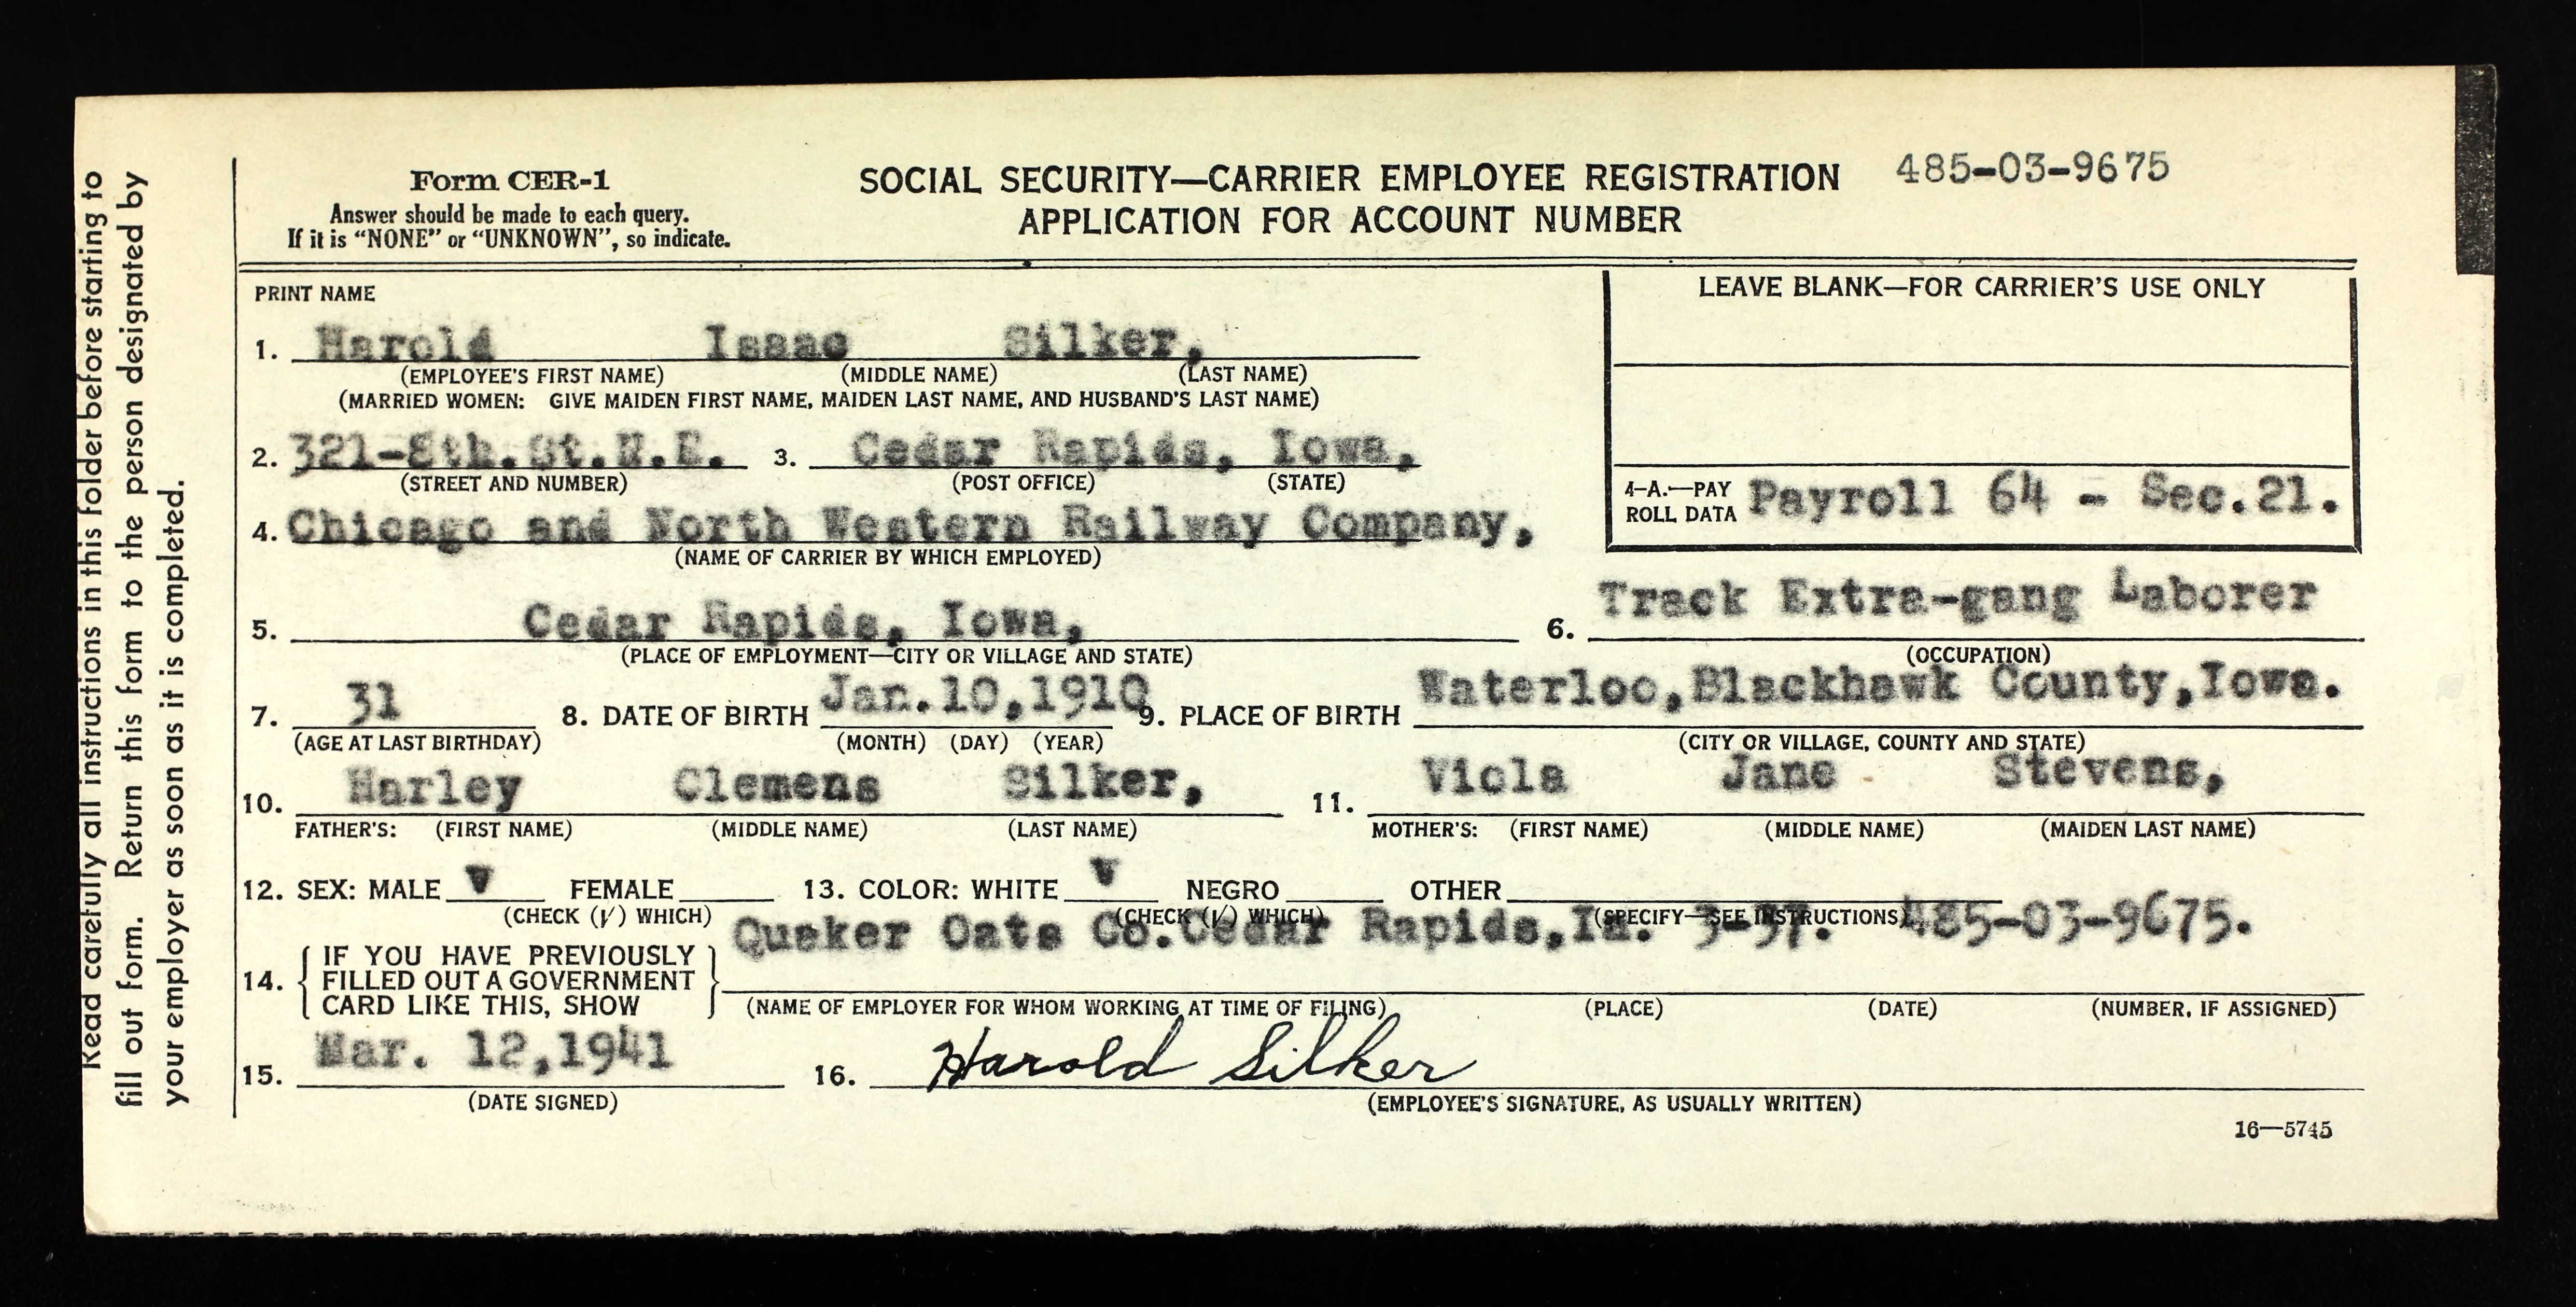 Application for Social Security account number for Harold Isaac Silker